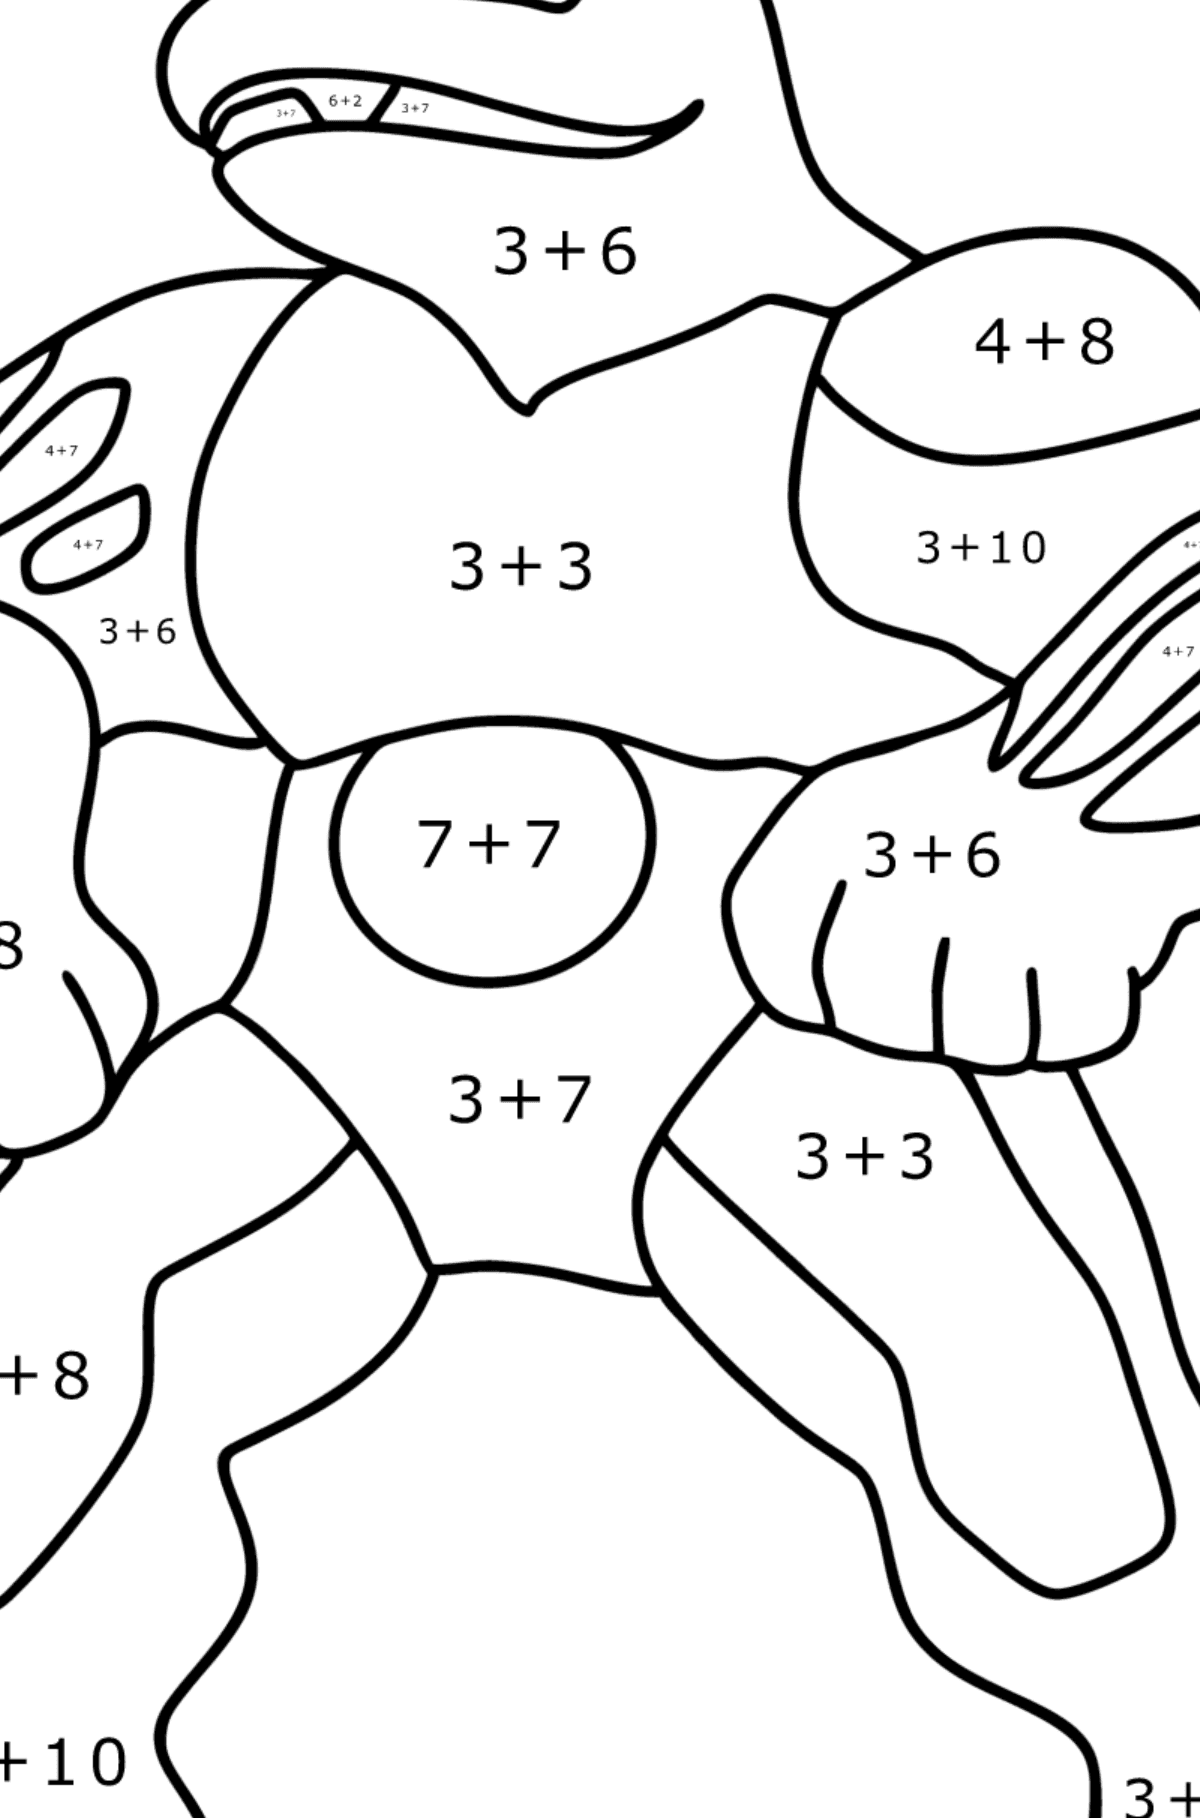 Coloring page Pokemon Go Machoke - Math Coloring - Addition for Kids